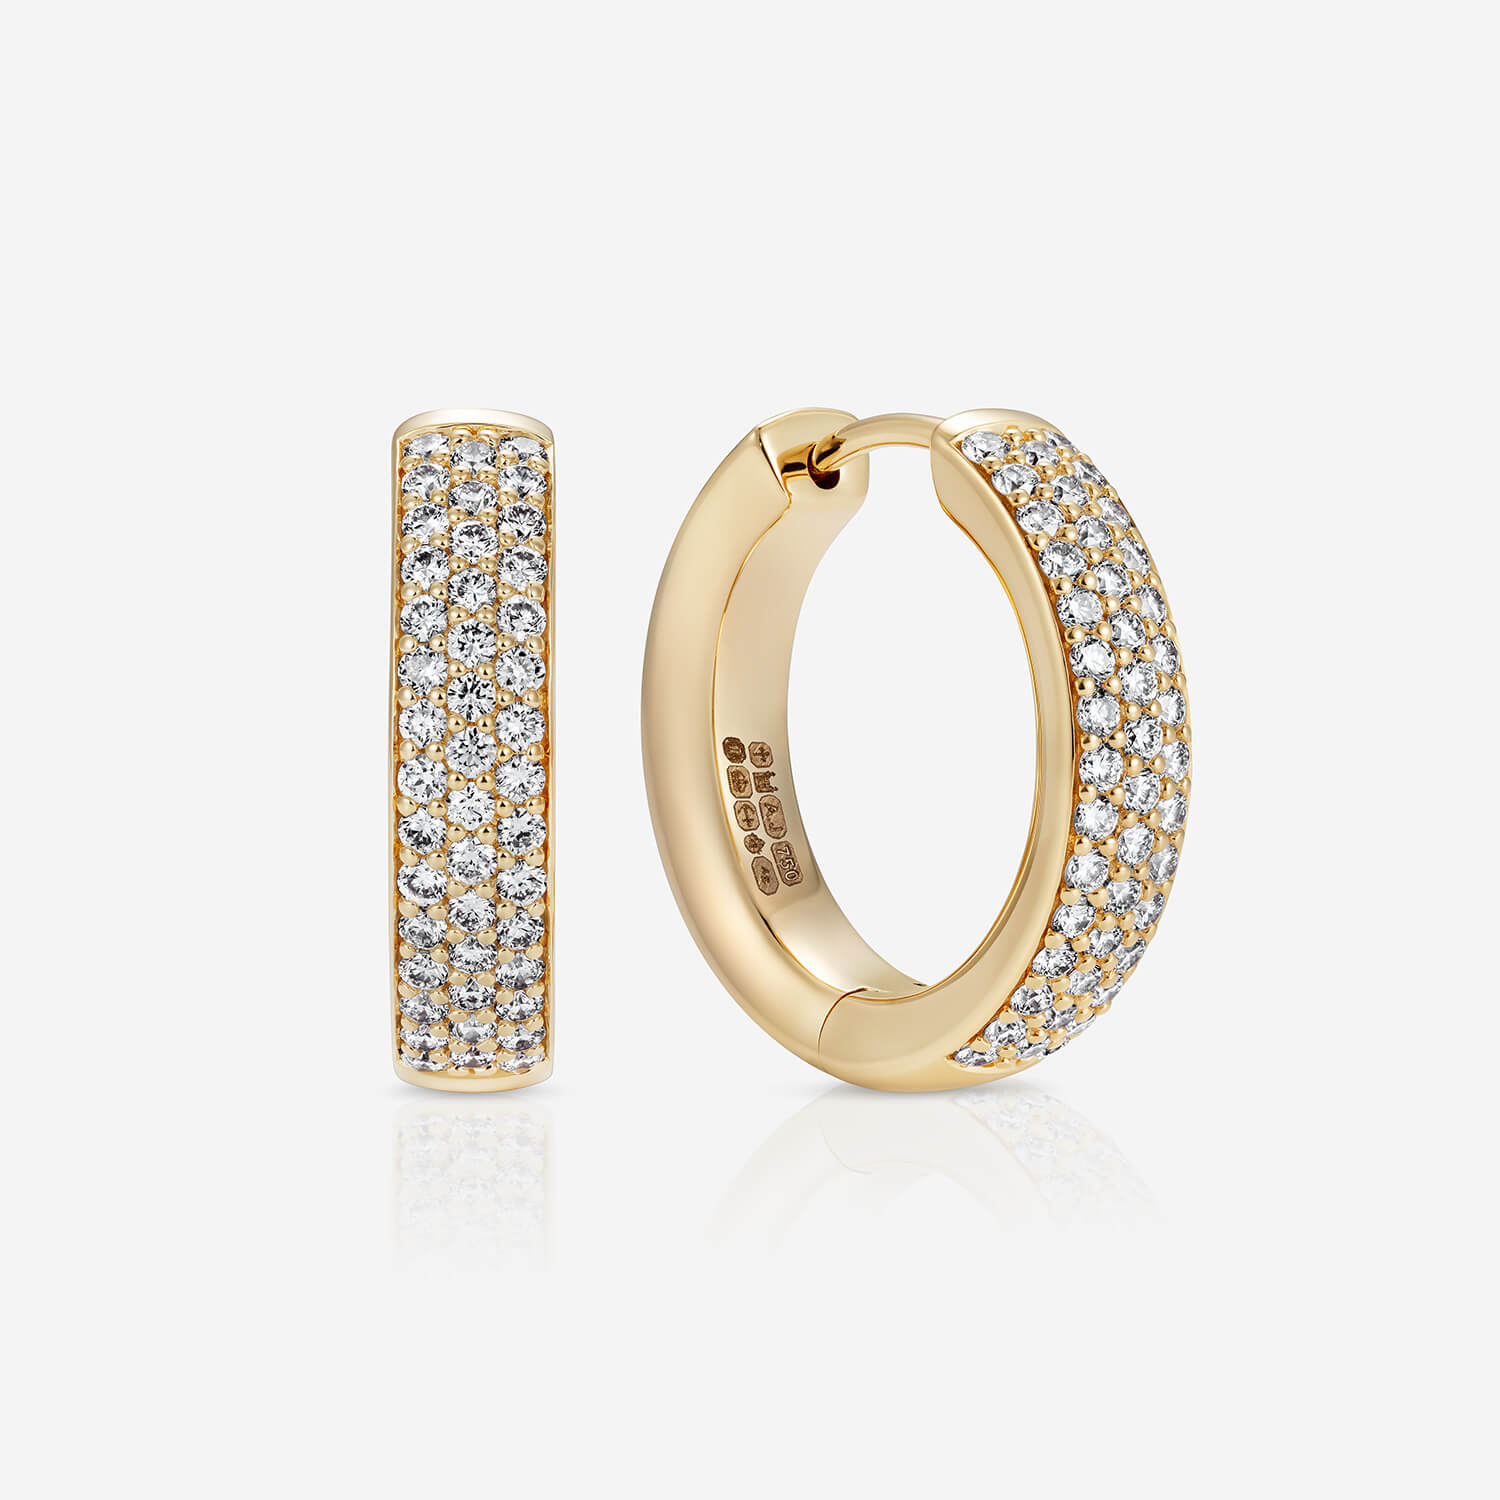 886 Royal Mint Earrings 886 Pavé Hoops in 18ct Yellow Gold